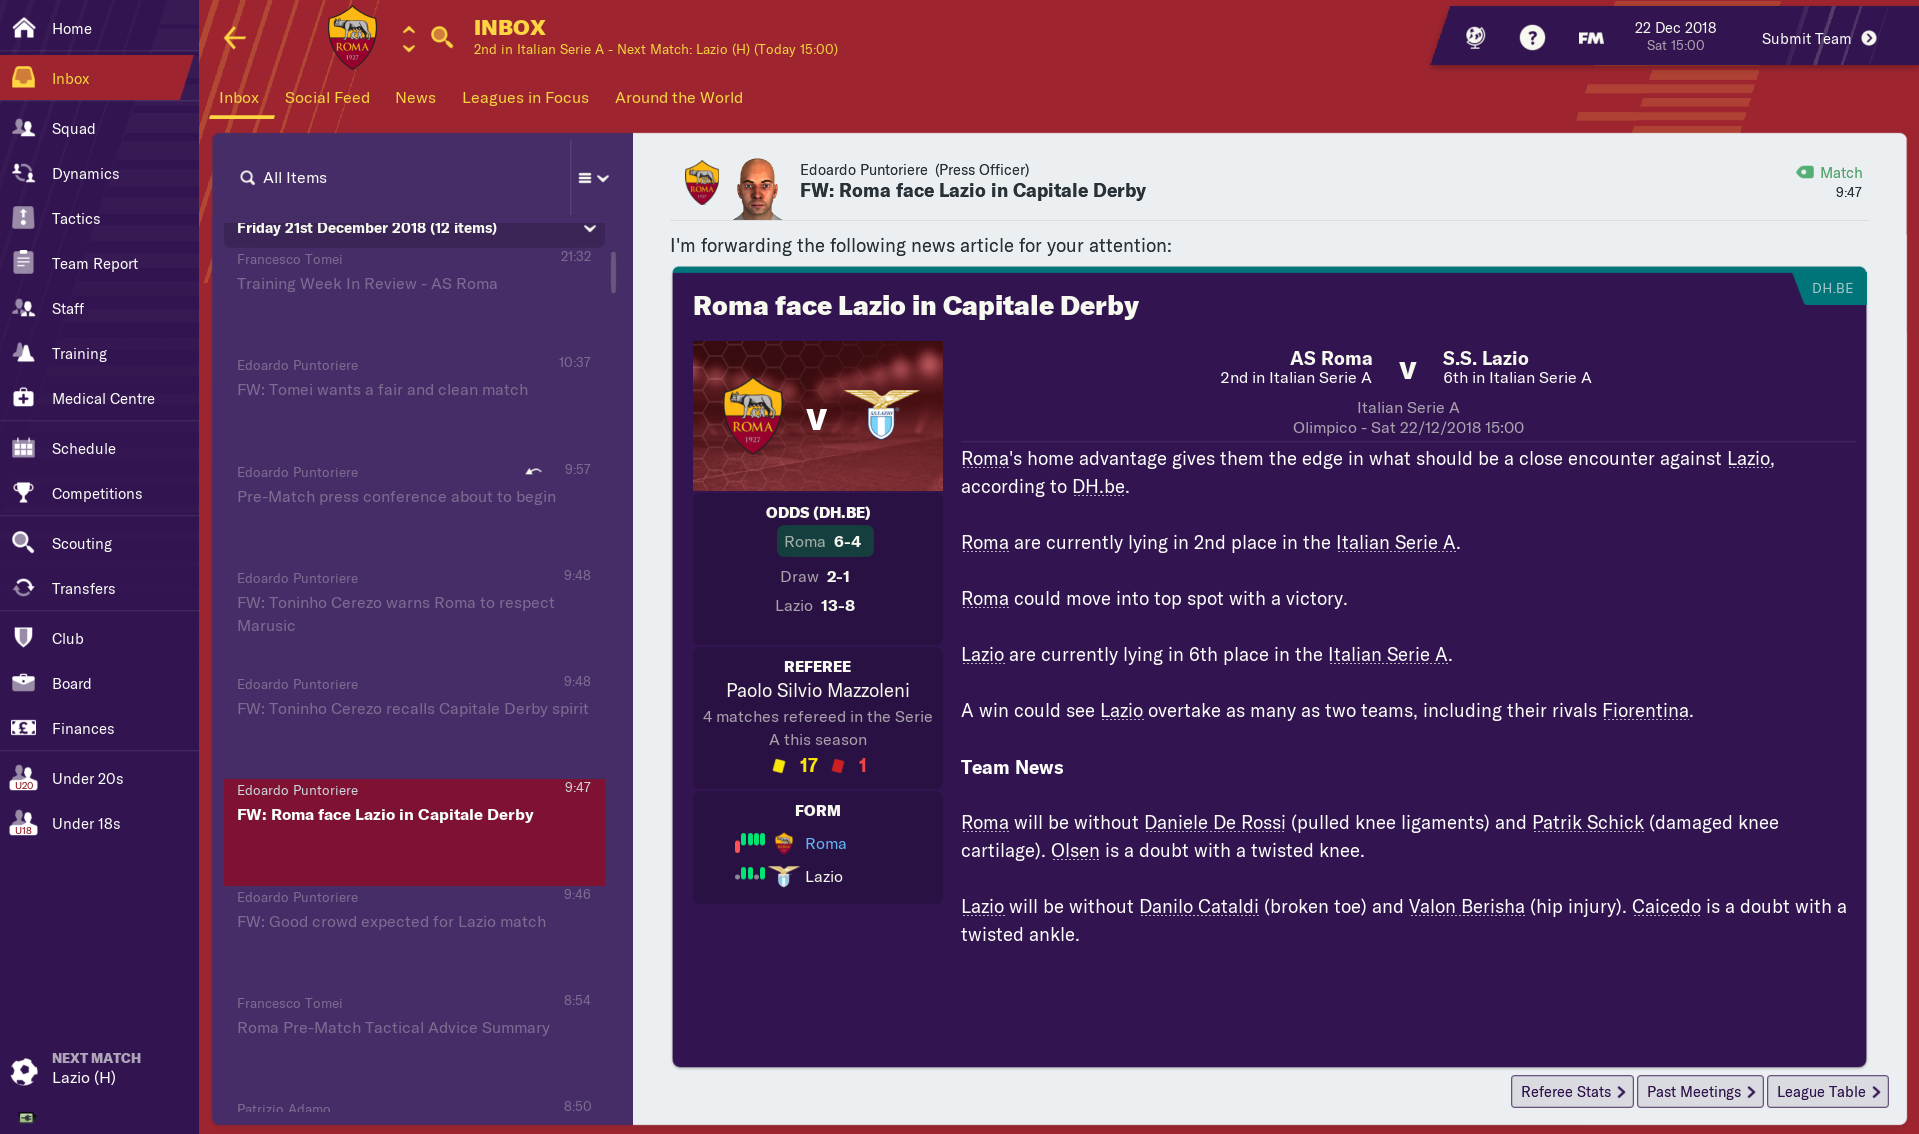 A match preview in Football Manager 2019